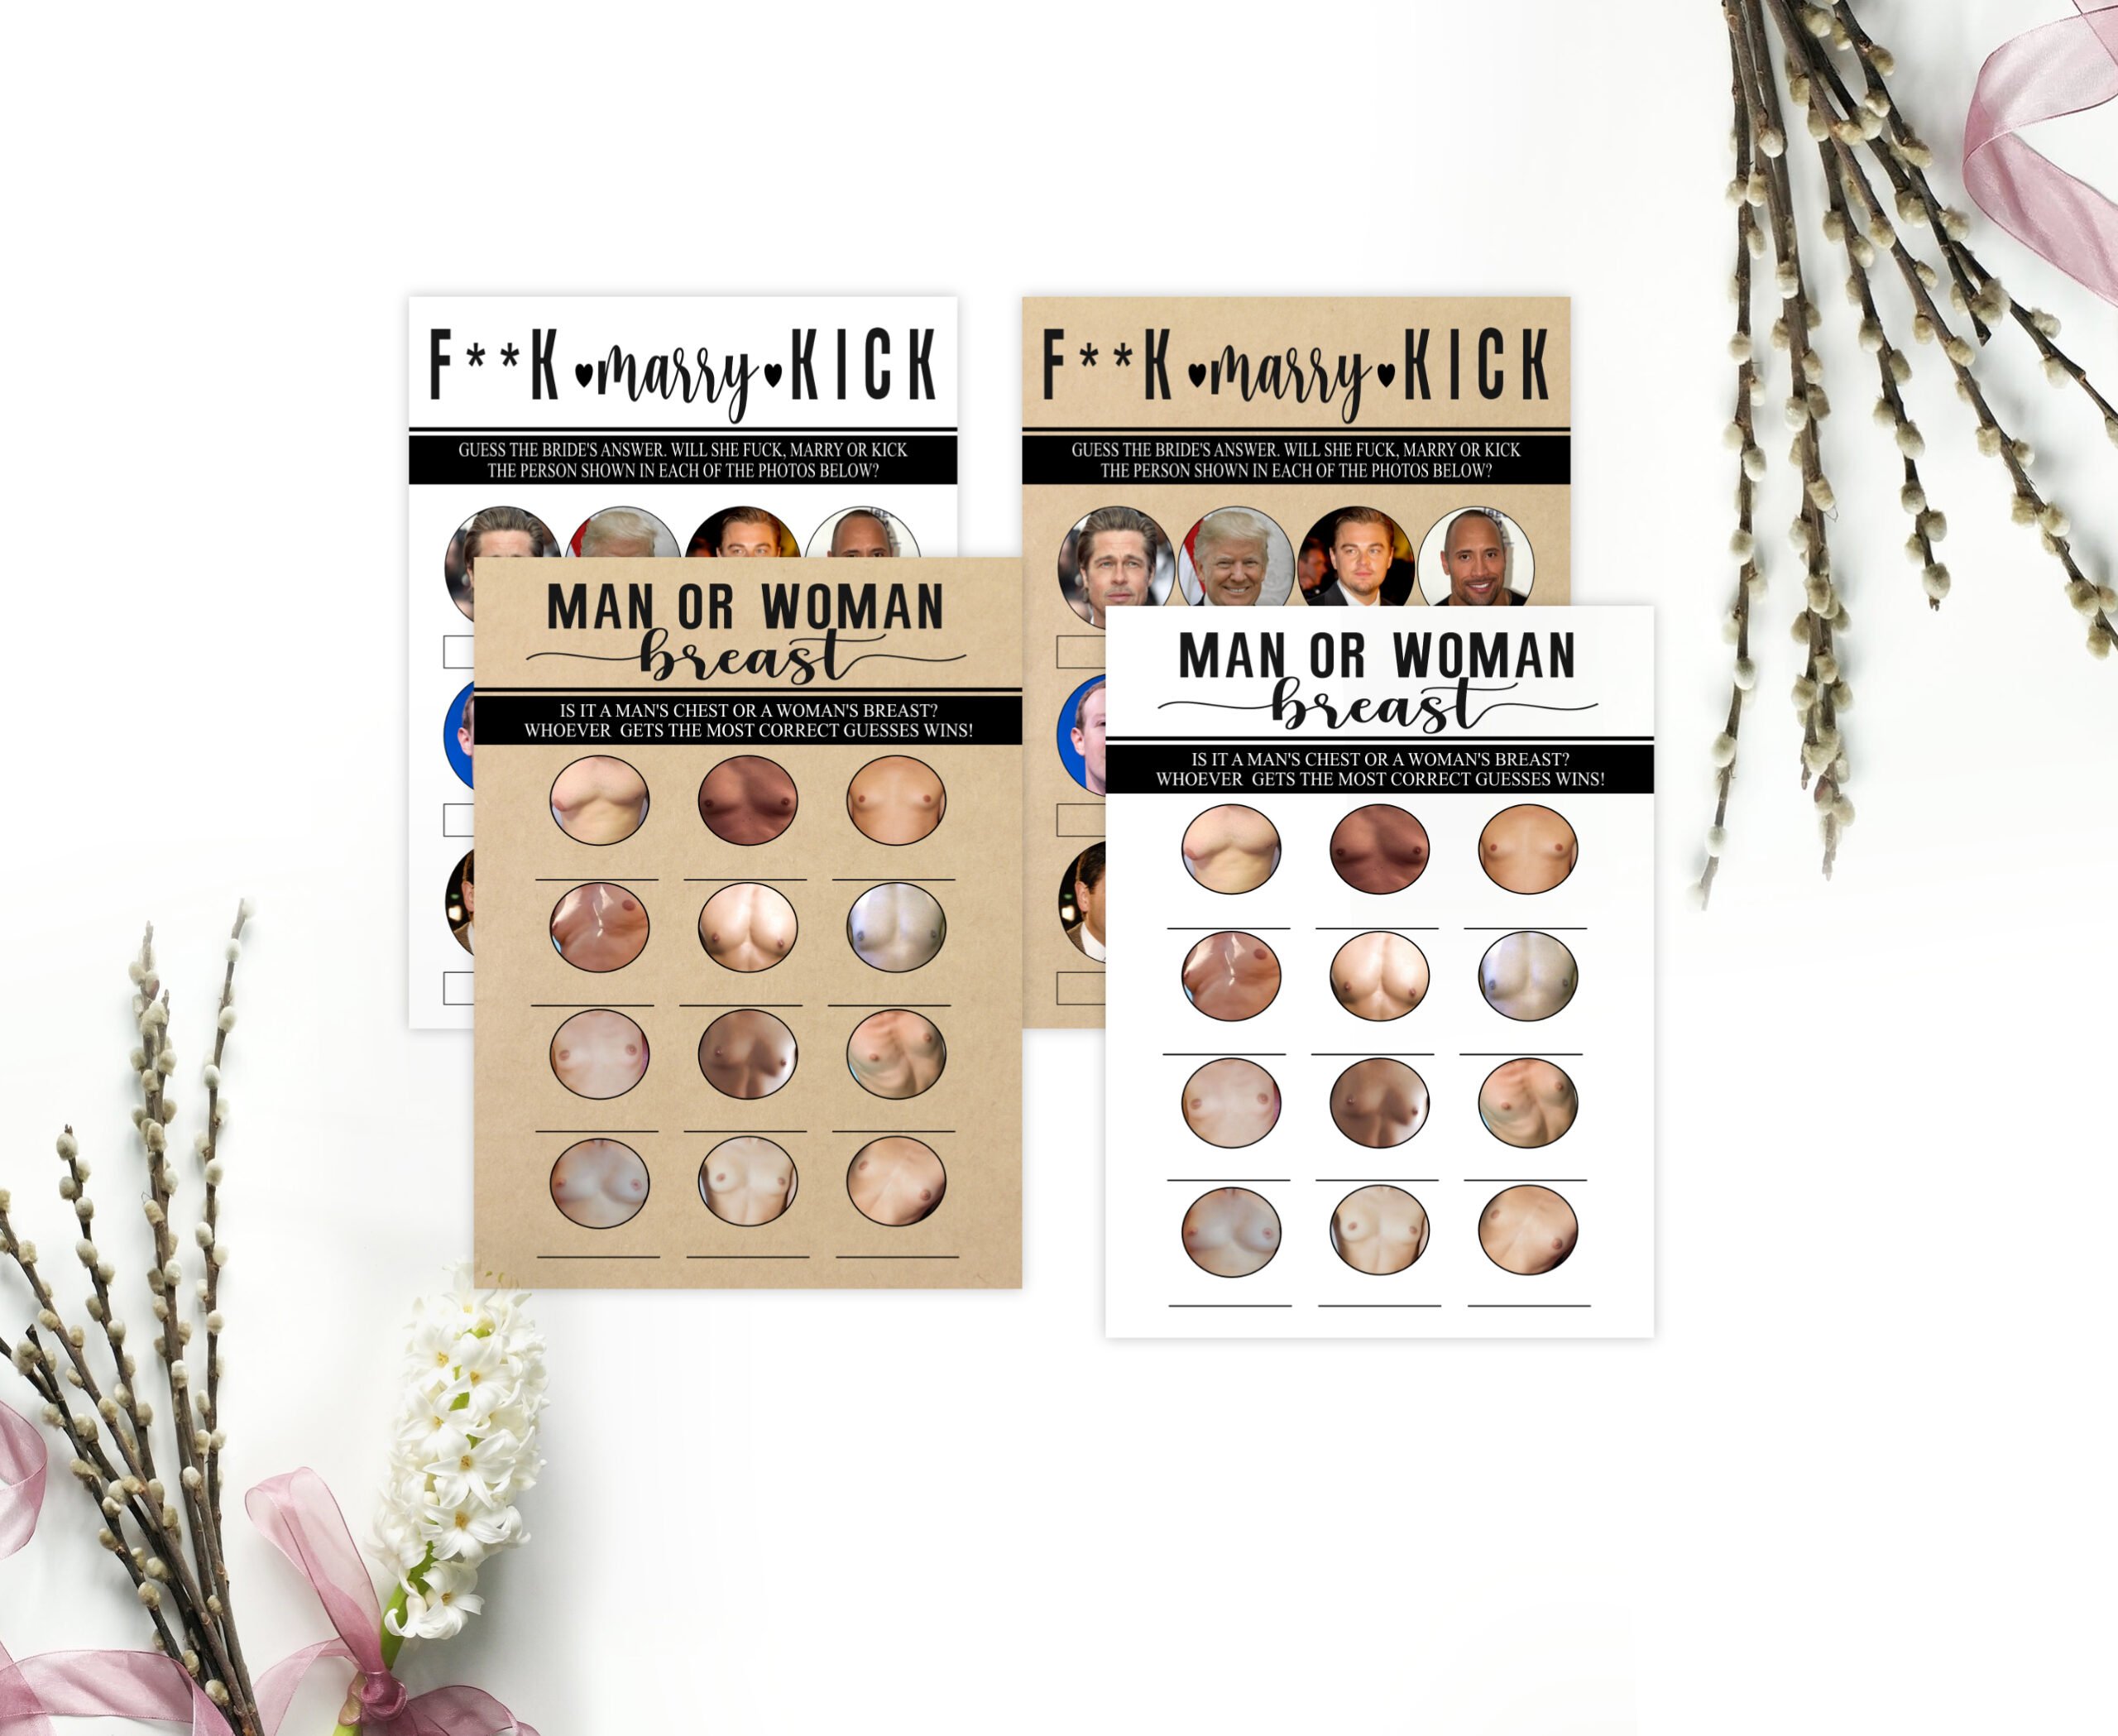 Bridal Shower Games 12-1 Rustic Dirty Naughty Games Pack Hen do party games